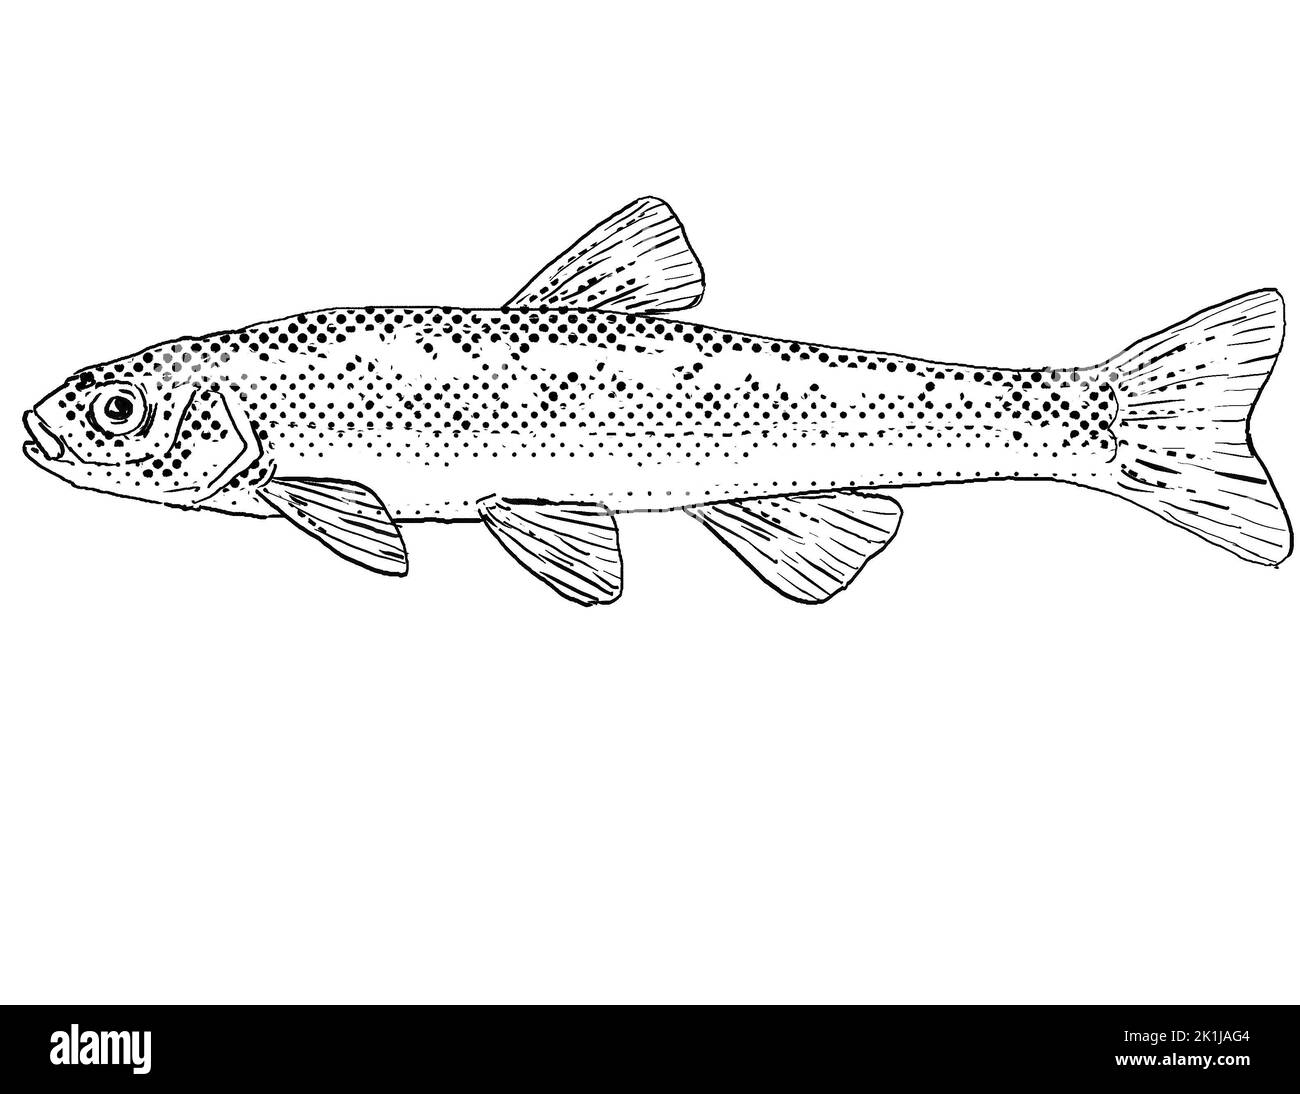 Cartoon style line drawing of a northern pearl dace or Margariscus nachtriebi a freshwater fish endemic to North America with halftone dots shading on Stock Photo